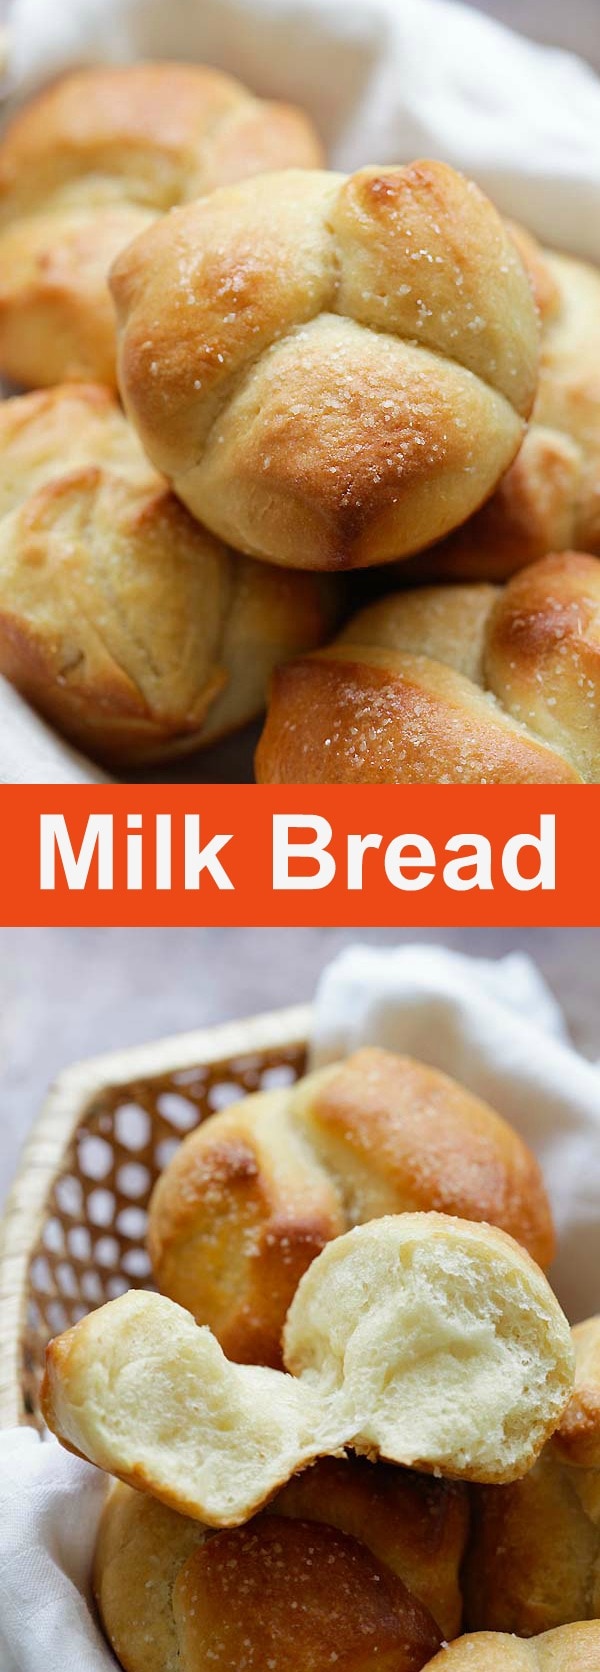 Milk Bread – Japanese-inspired milk bread that is cotton soft, sweet and delicious. Using roux method, this milk bread recipe is a keeper | rasamalaysia.com